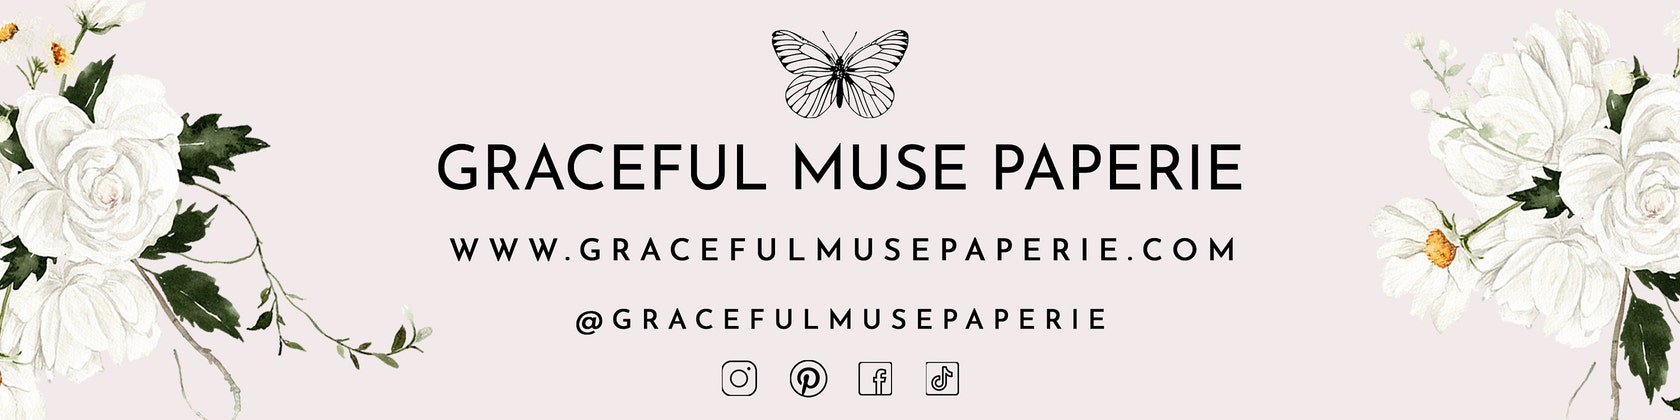 Graceful Muse Paperie